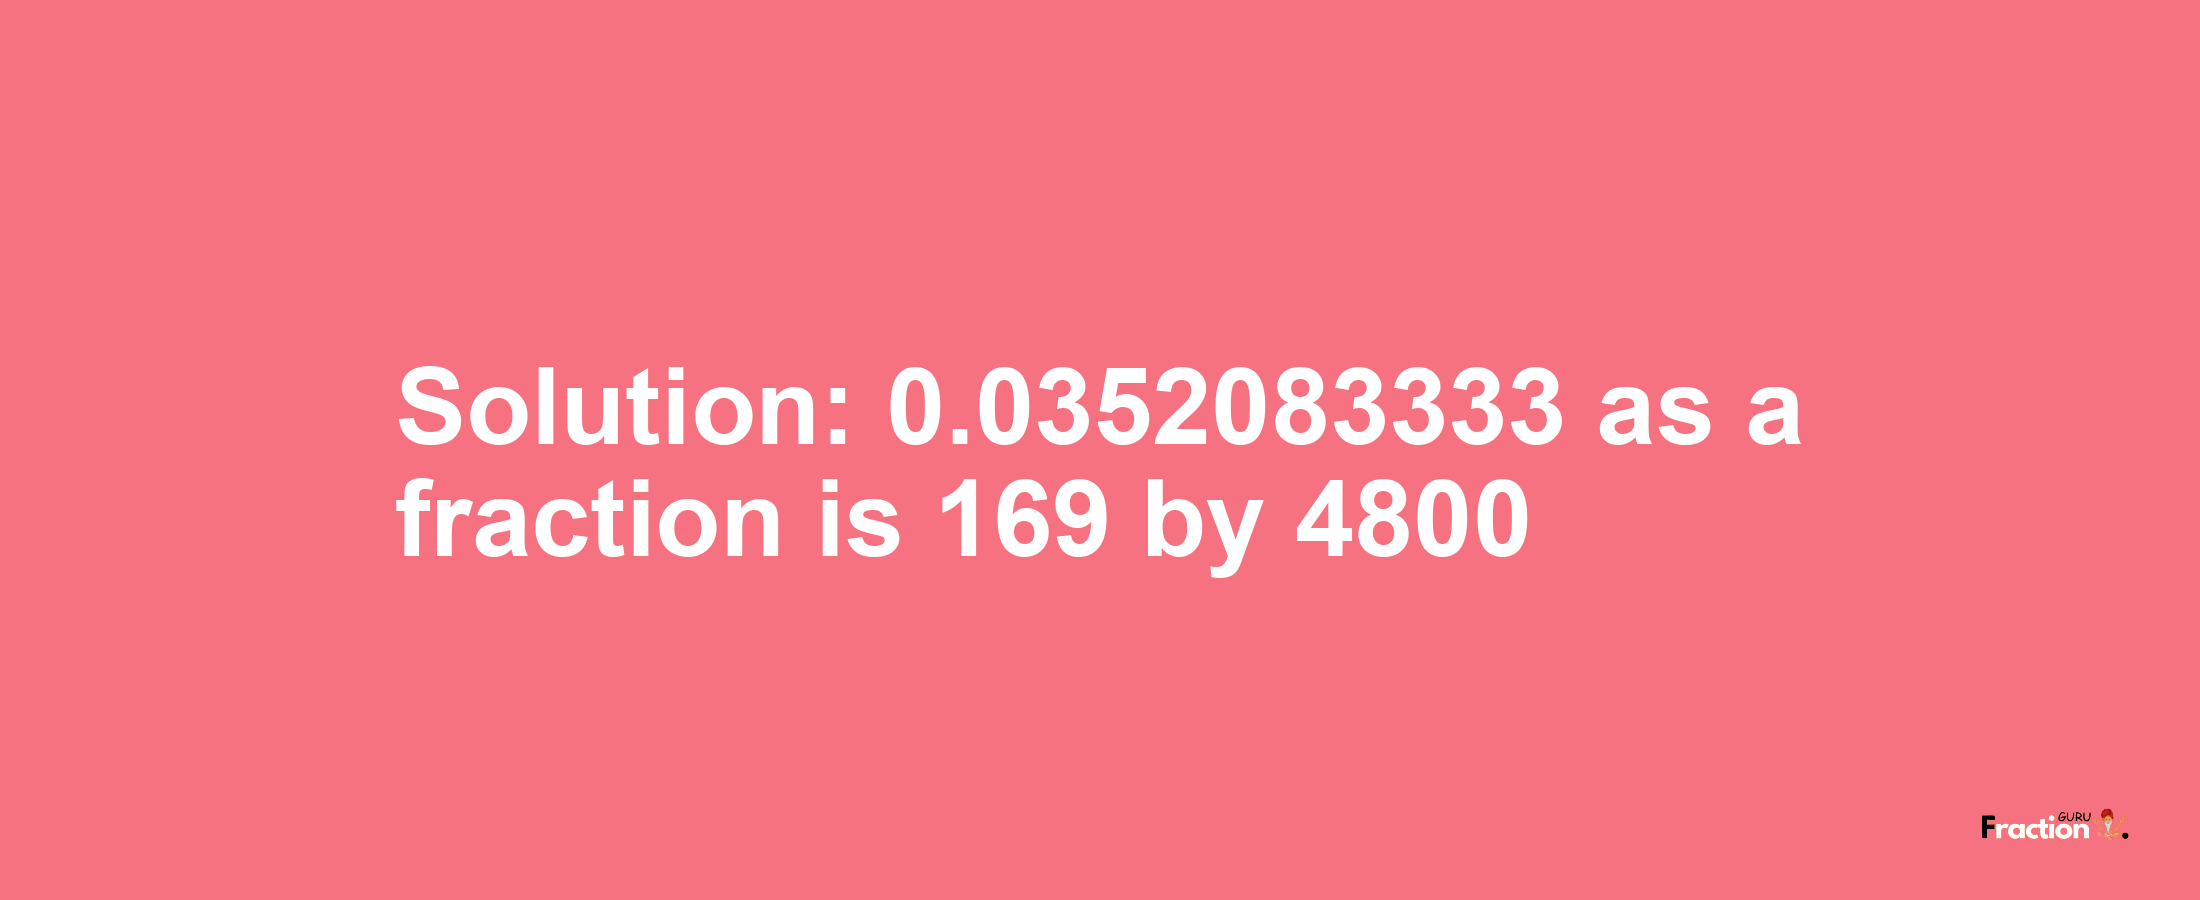 Solution:0.0352083333 as a fraction is 169/4800